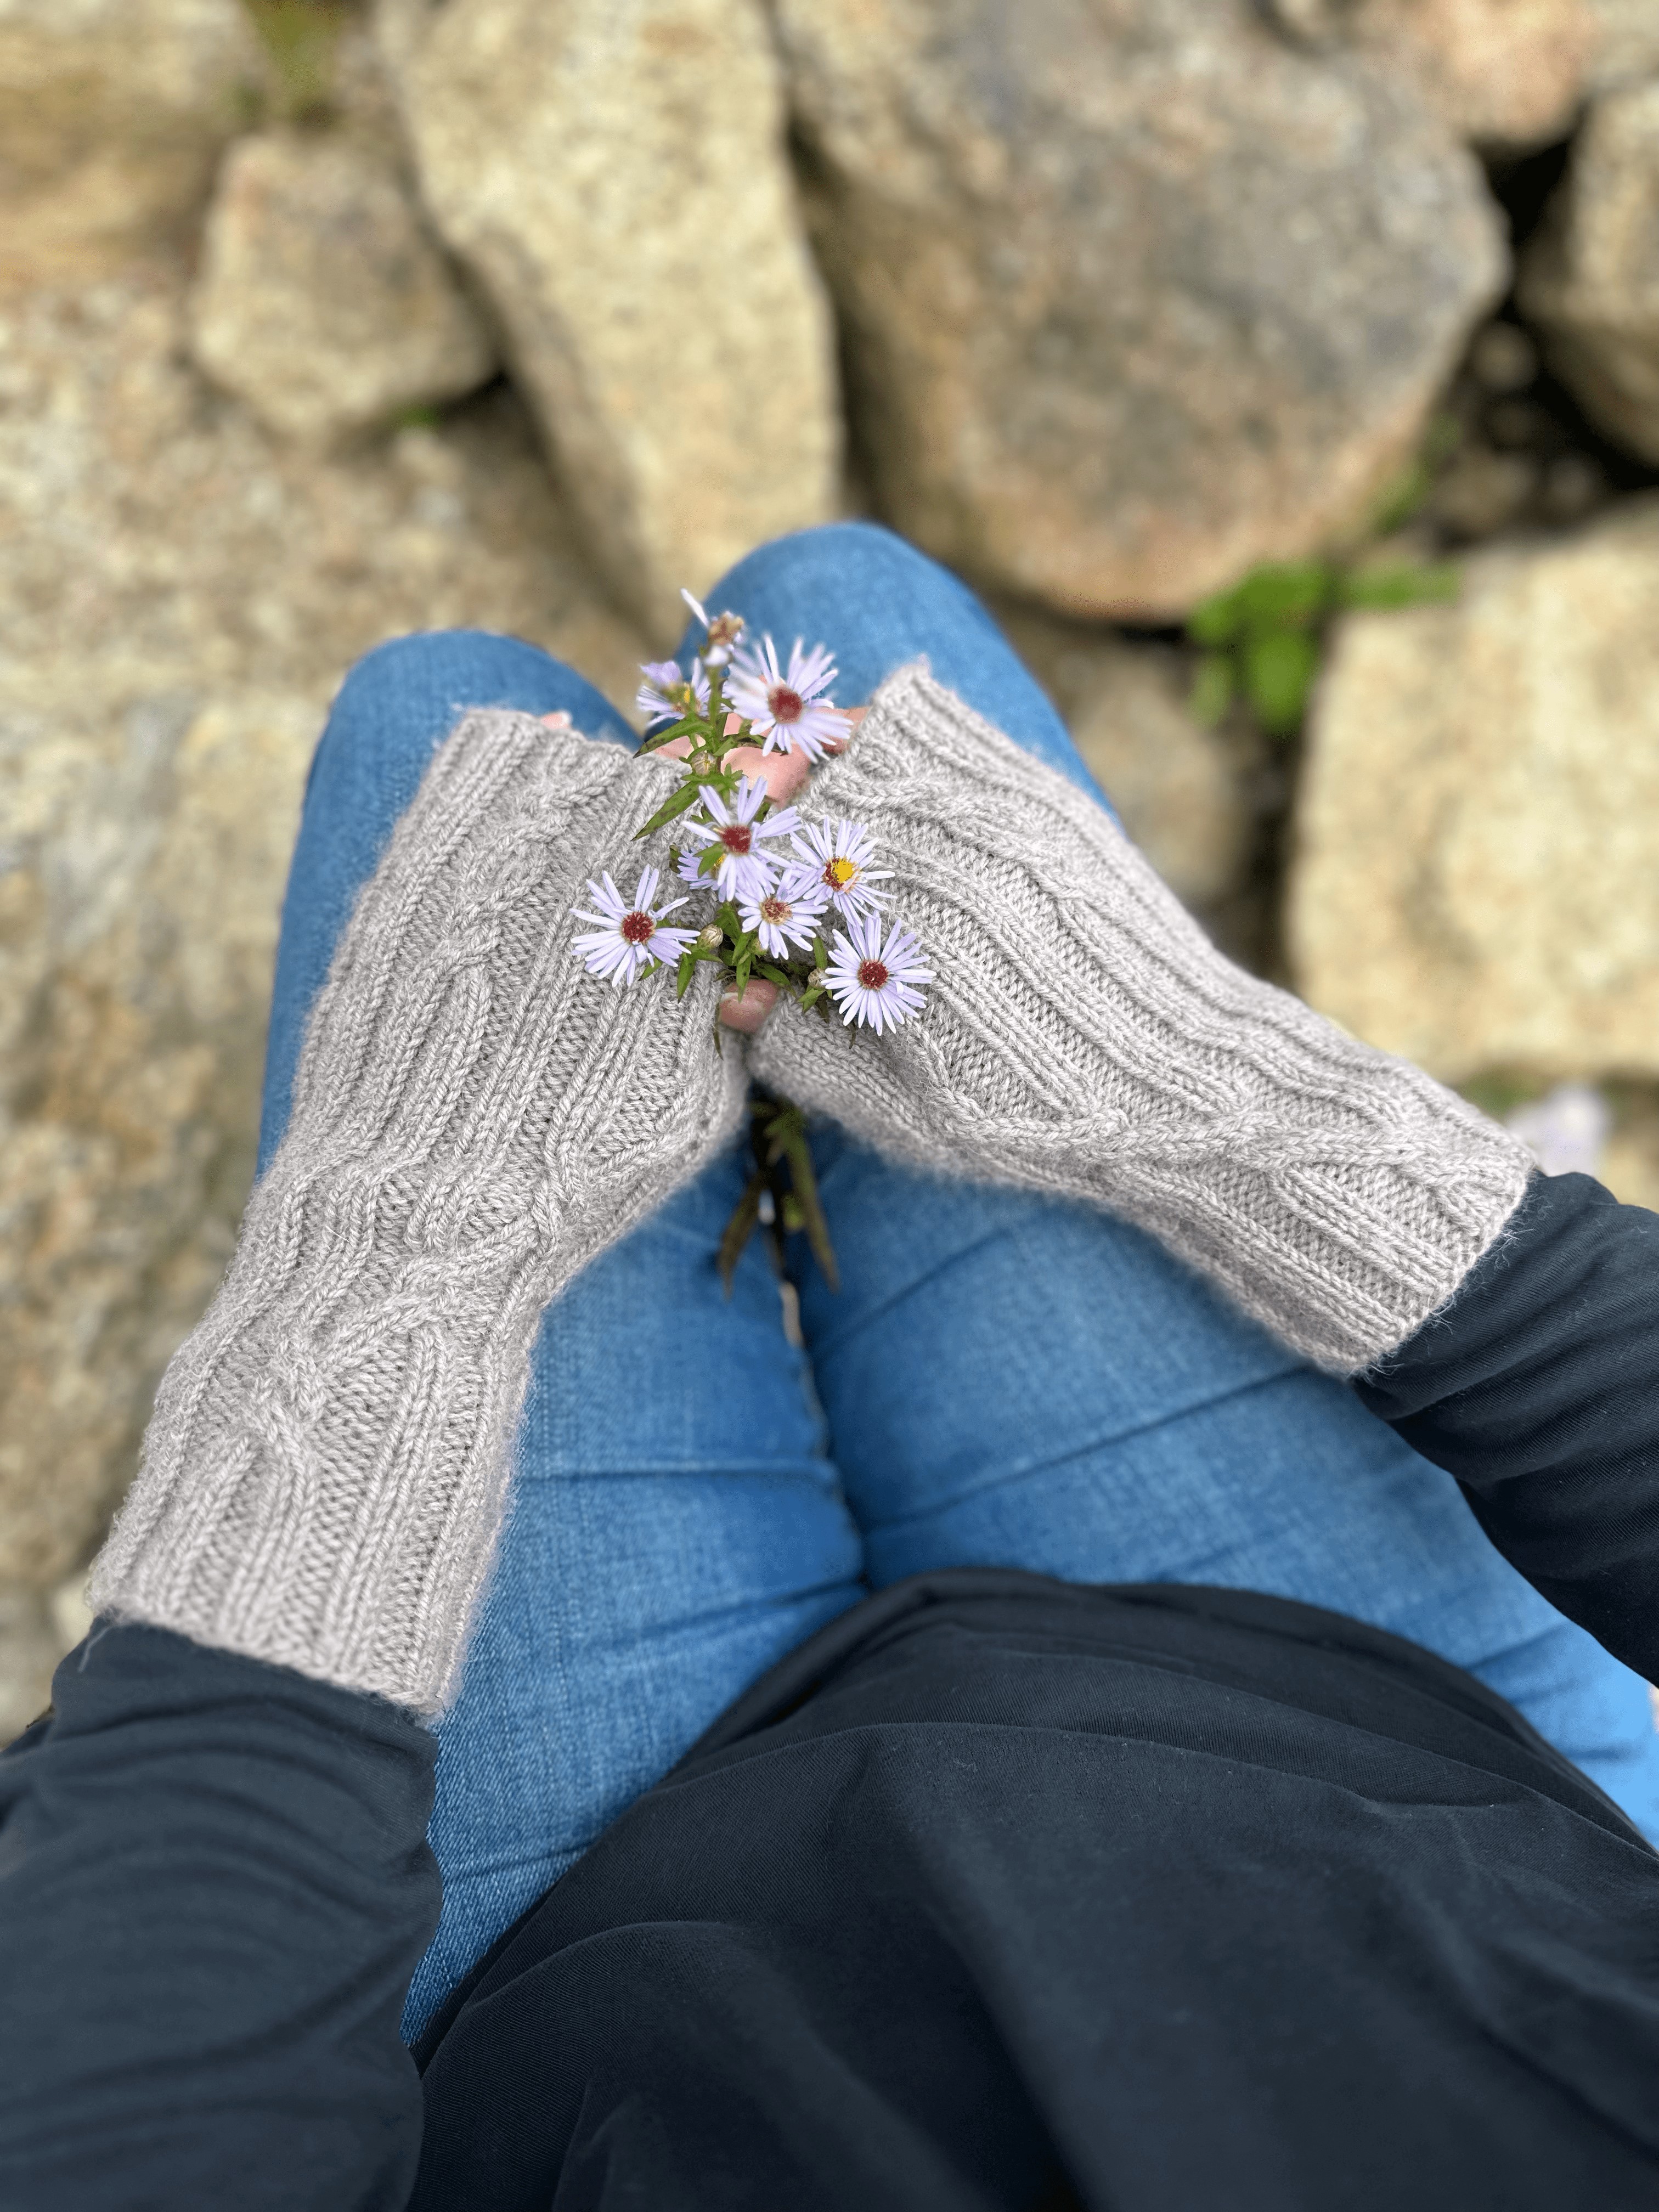 A close up image, taken from above, looking down onto a person's hands as they are resting on their knees. The person is wearing blue jeans and a black long-sleeved shirt. The photo is focussed on the pale grey, knitted, fingerless mittens worn by the subject. The fabric is ribbed, with occasional cable crosses where the straight lines of the ribbing cross to go in a different direction. The person is also holding a tiny bunch of purple daisy-like flowers. The background of the photo shows many rocks in different sizes and shapes.